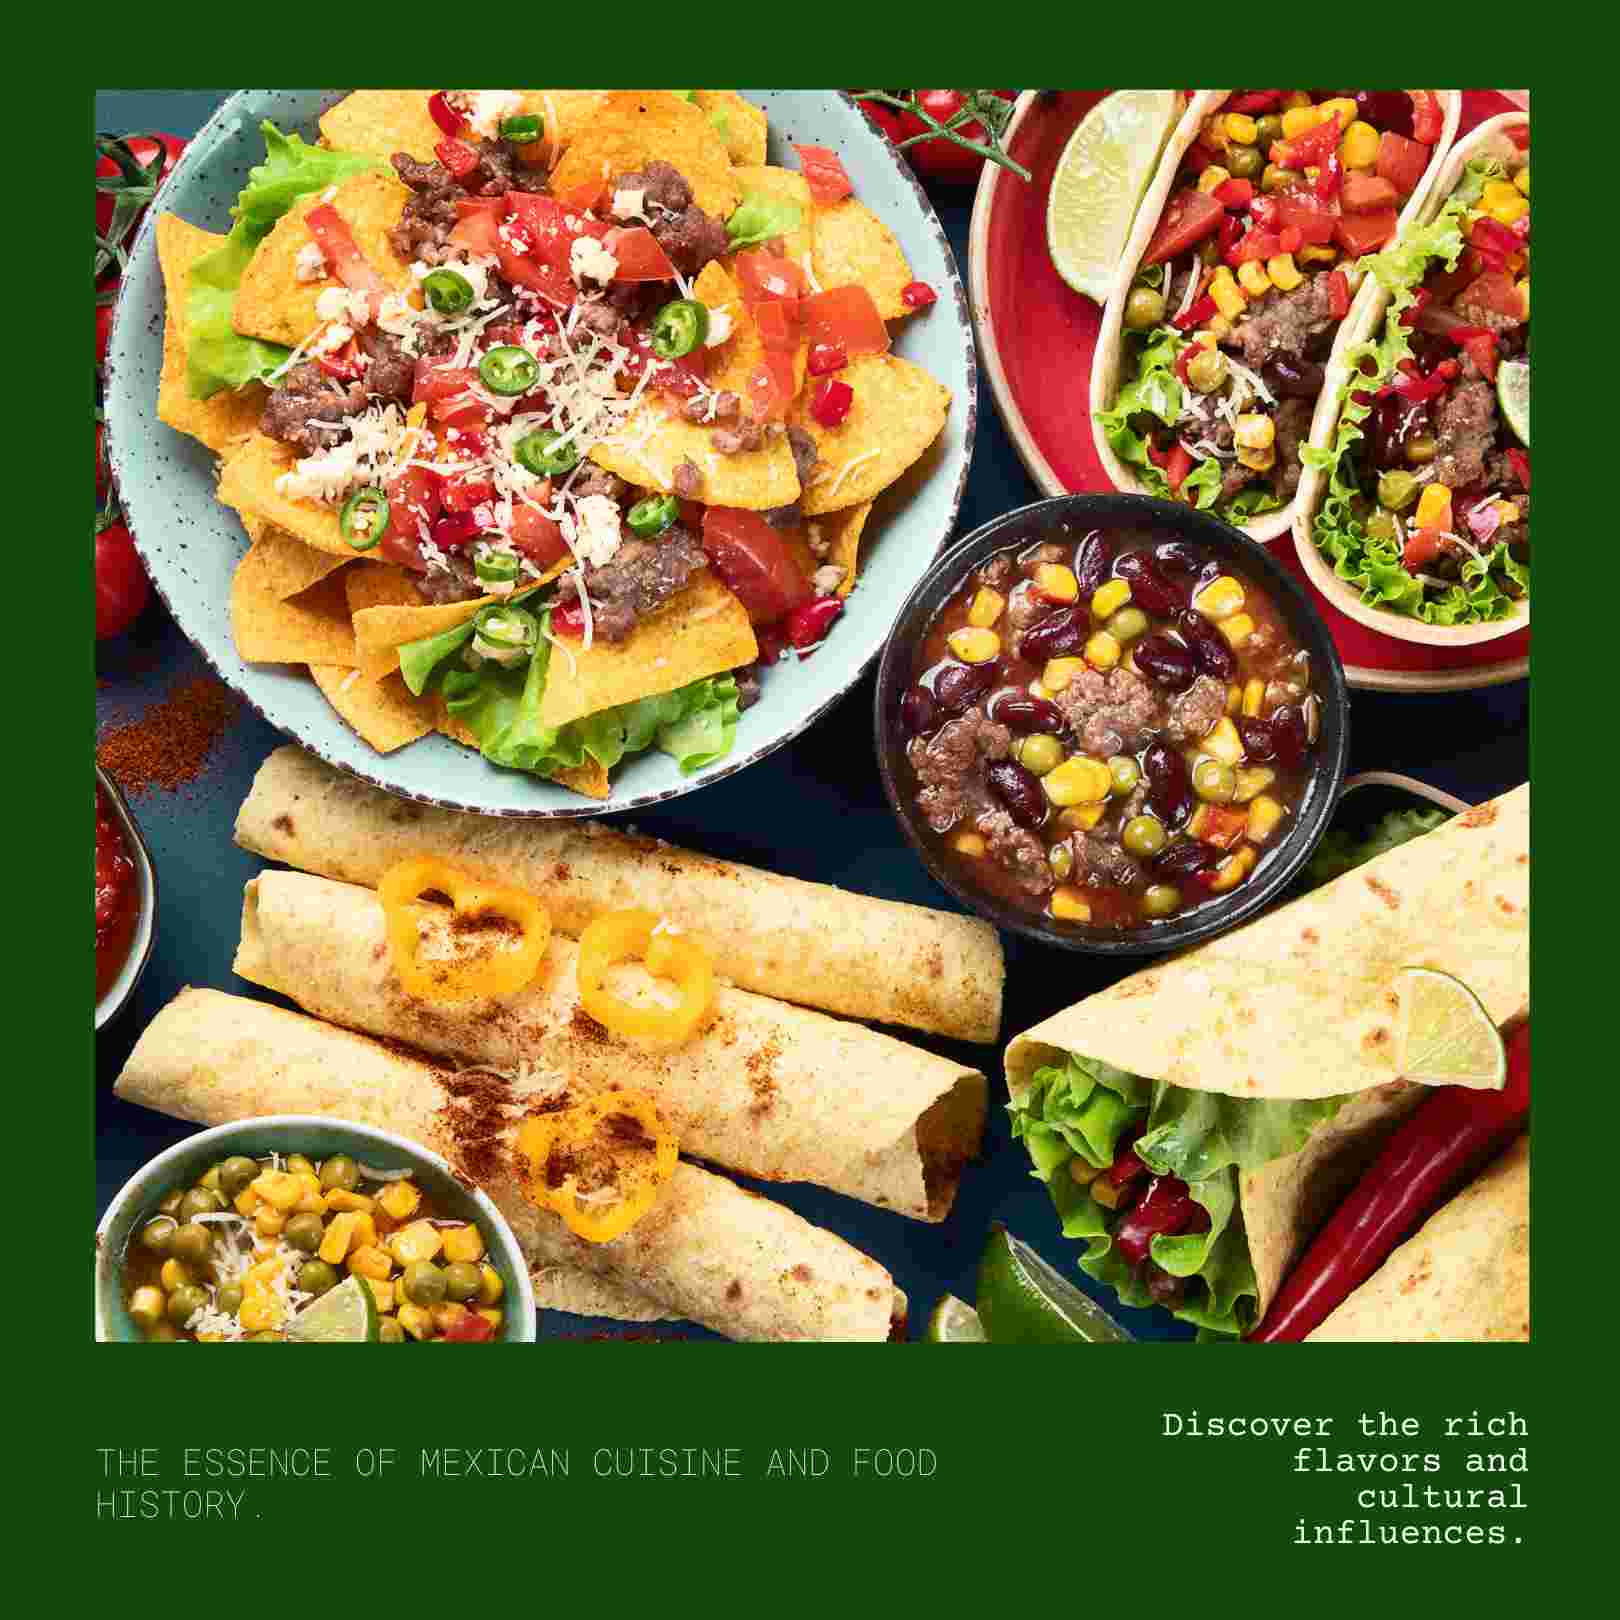 The Essence of Mexican Cuisine and Food History